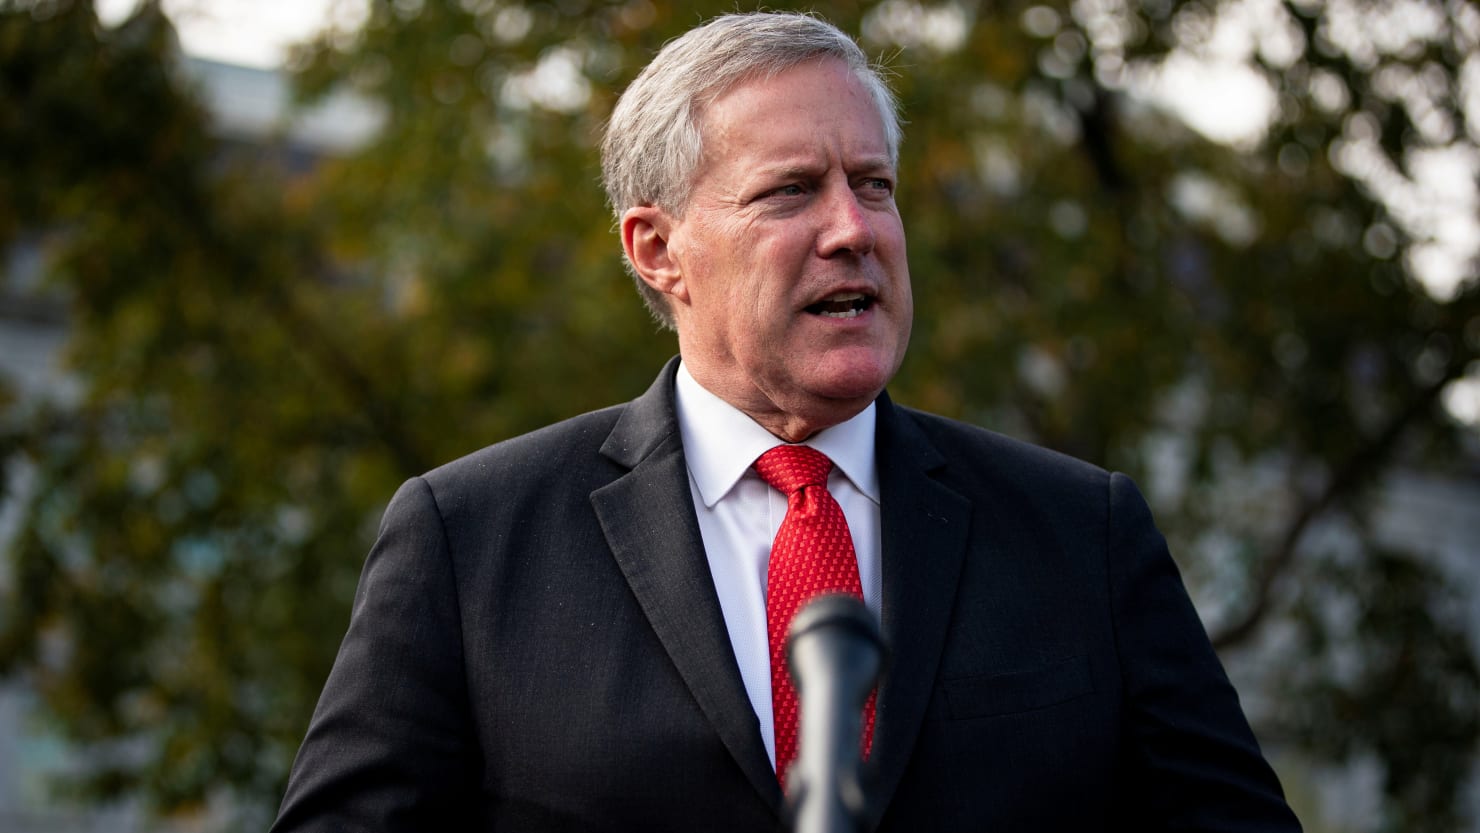 Mark Meadows has worked to keep secret positive coronavirus tests, the report says